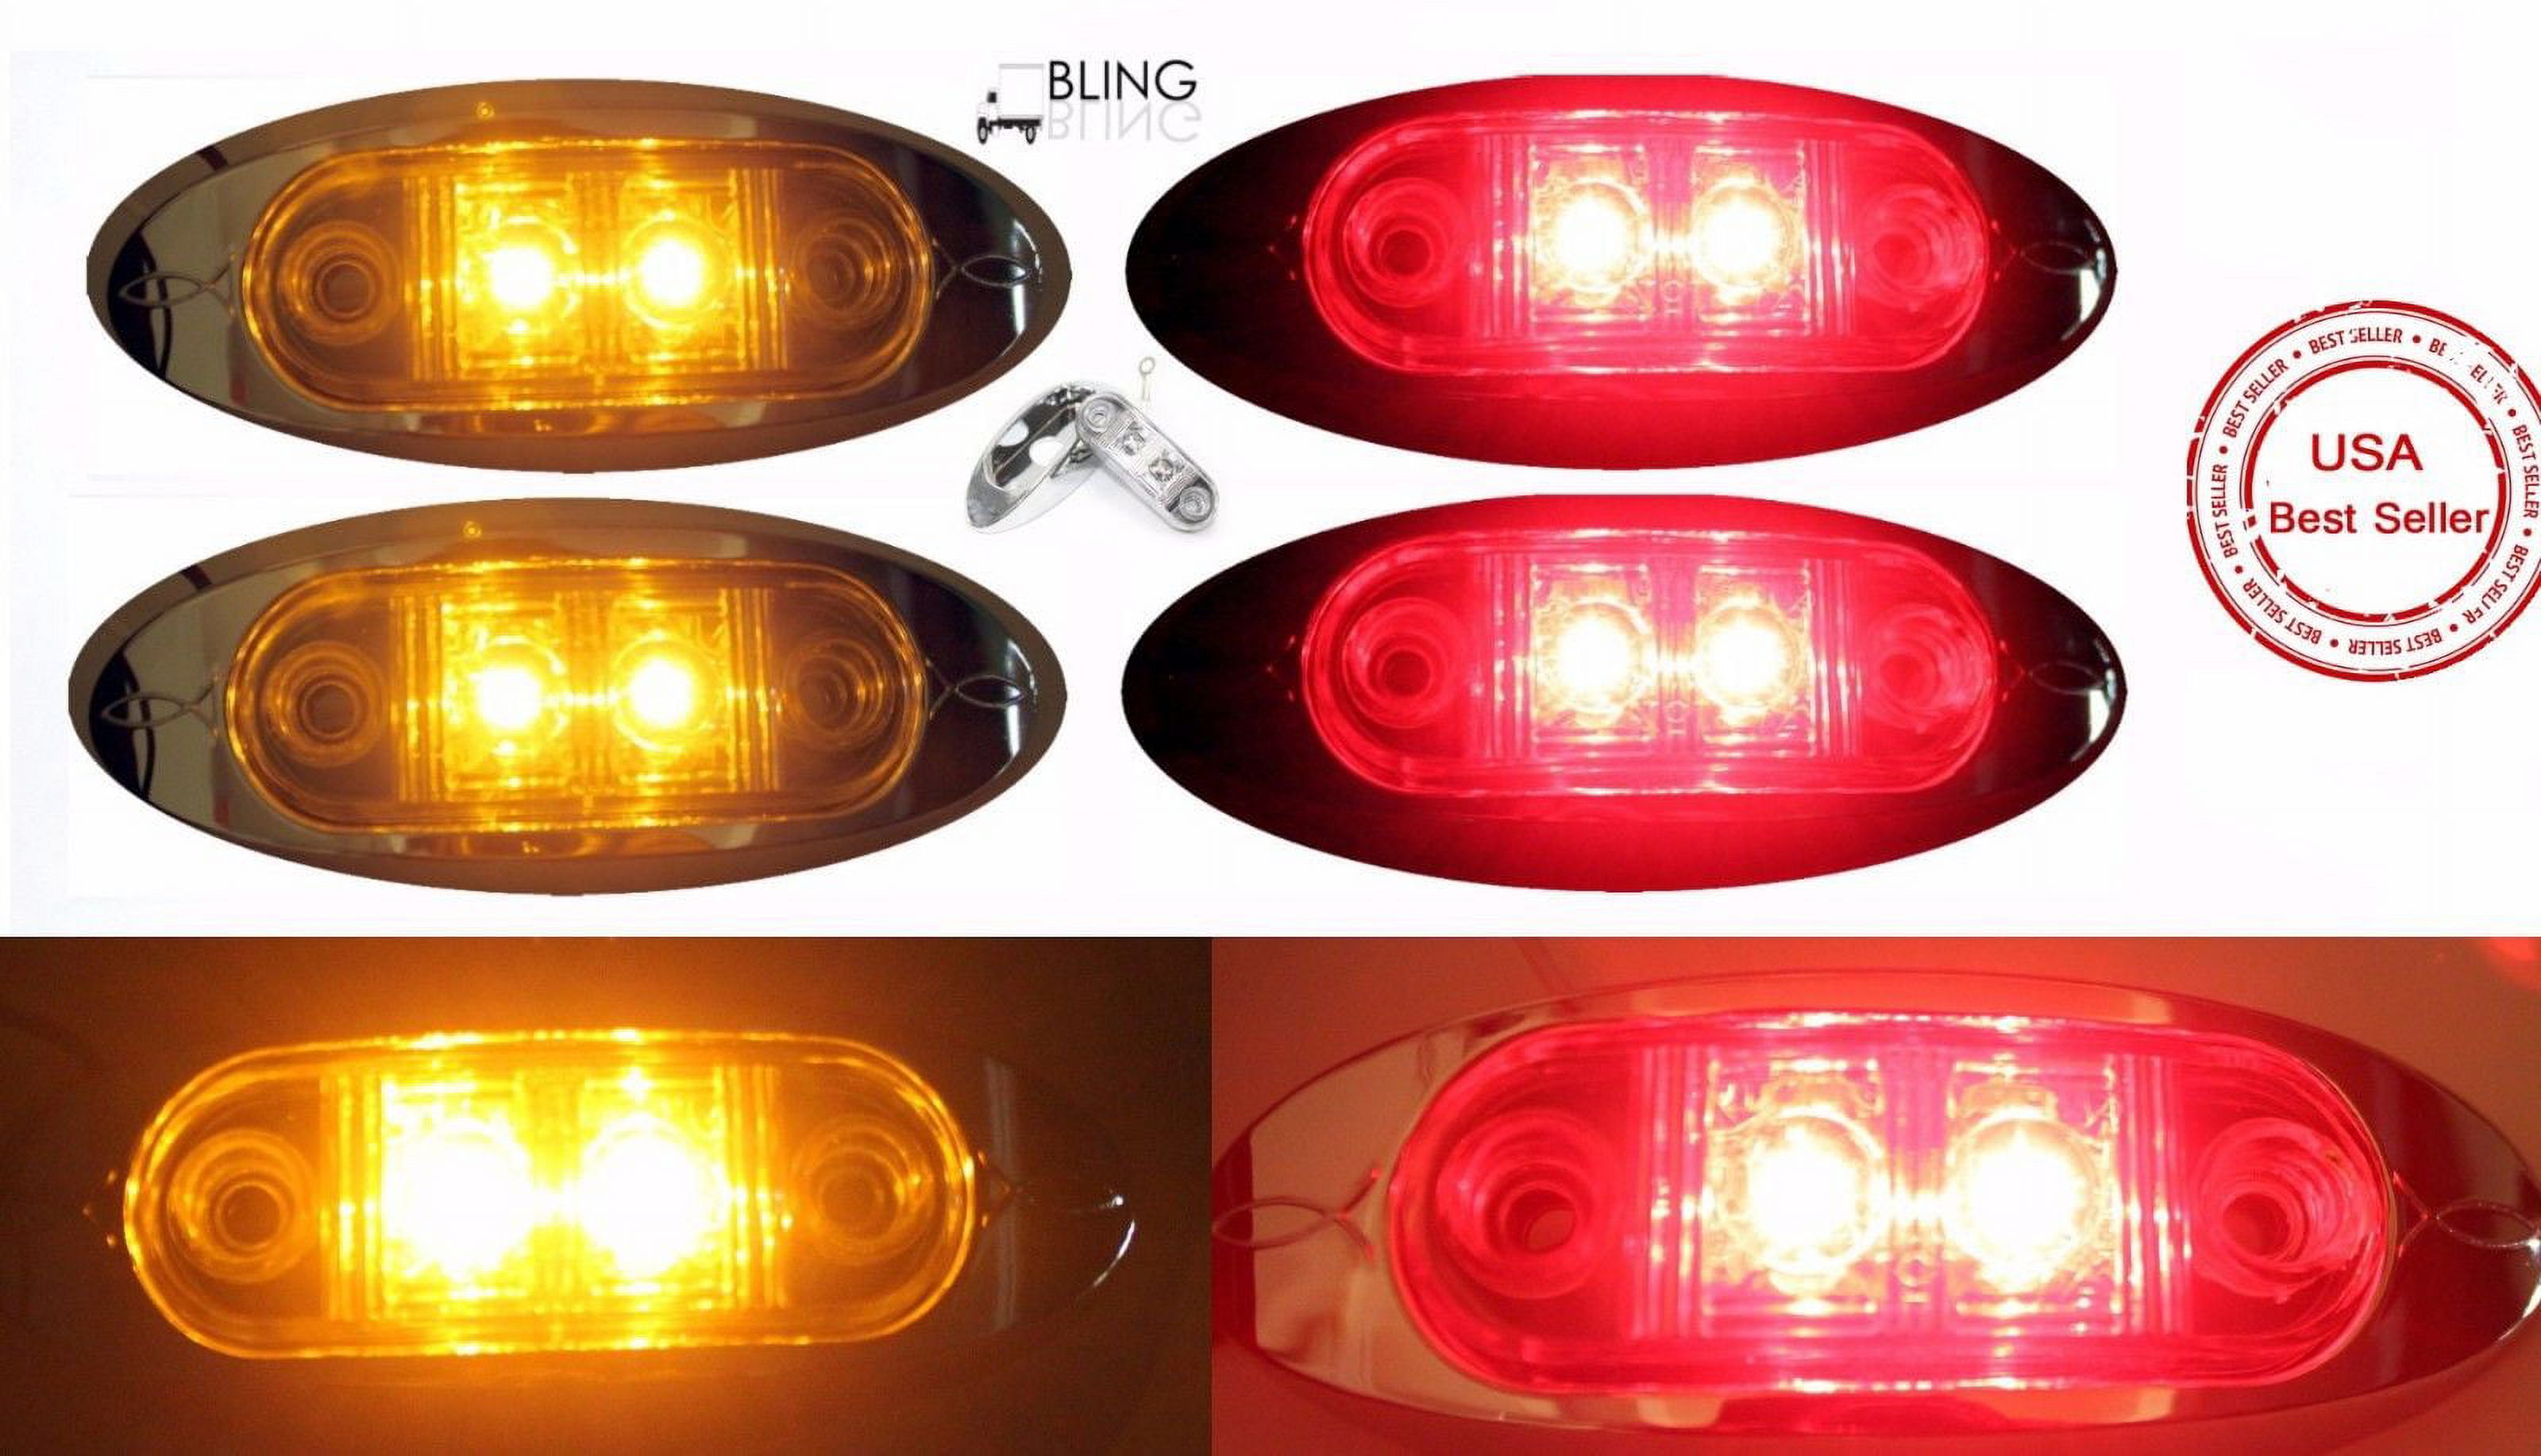 2 Amber and 2 Red Clear Lens Oval Flat Base Clearance Fender 2" Side Marker LED Light Truck Trailer - image 1 of 4